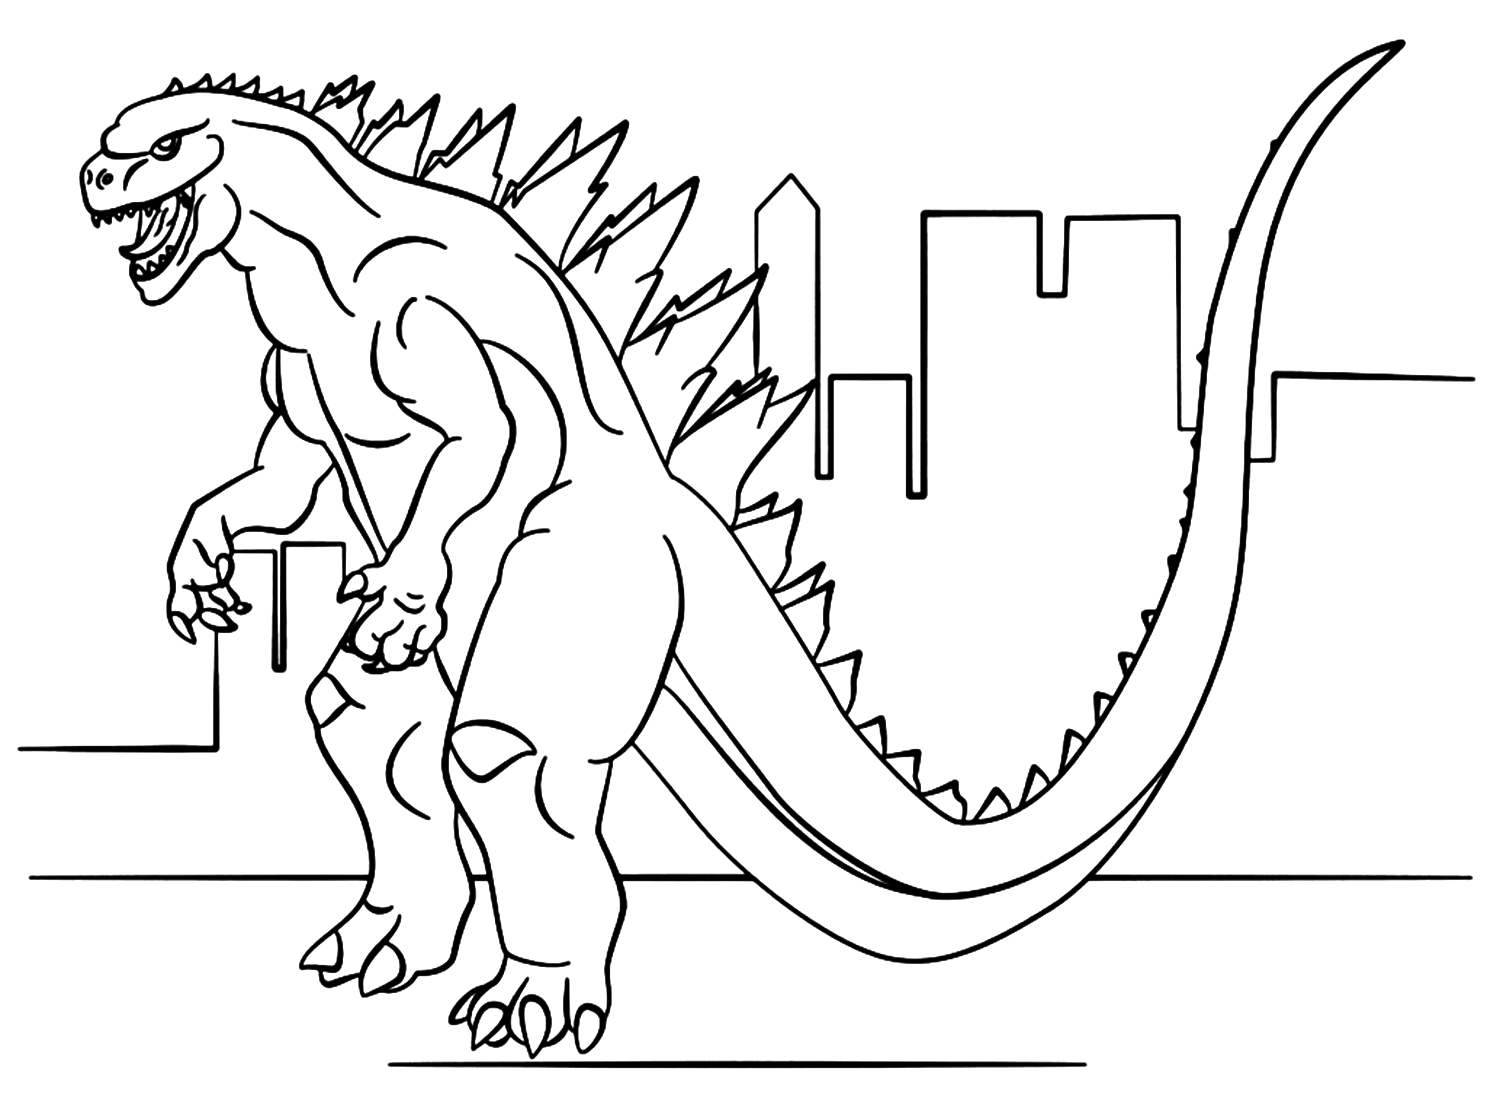 Godzilla Is Angry Coloring Pages